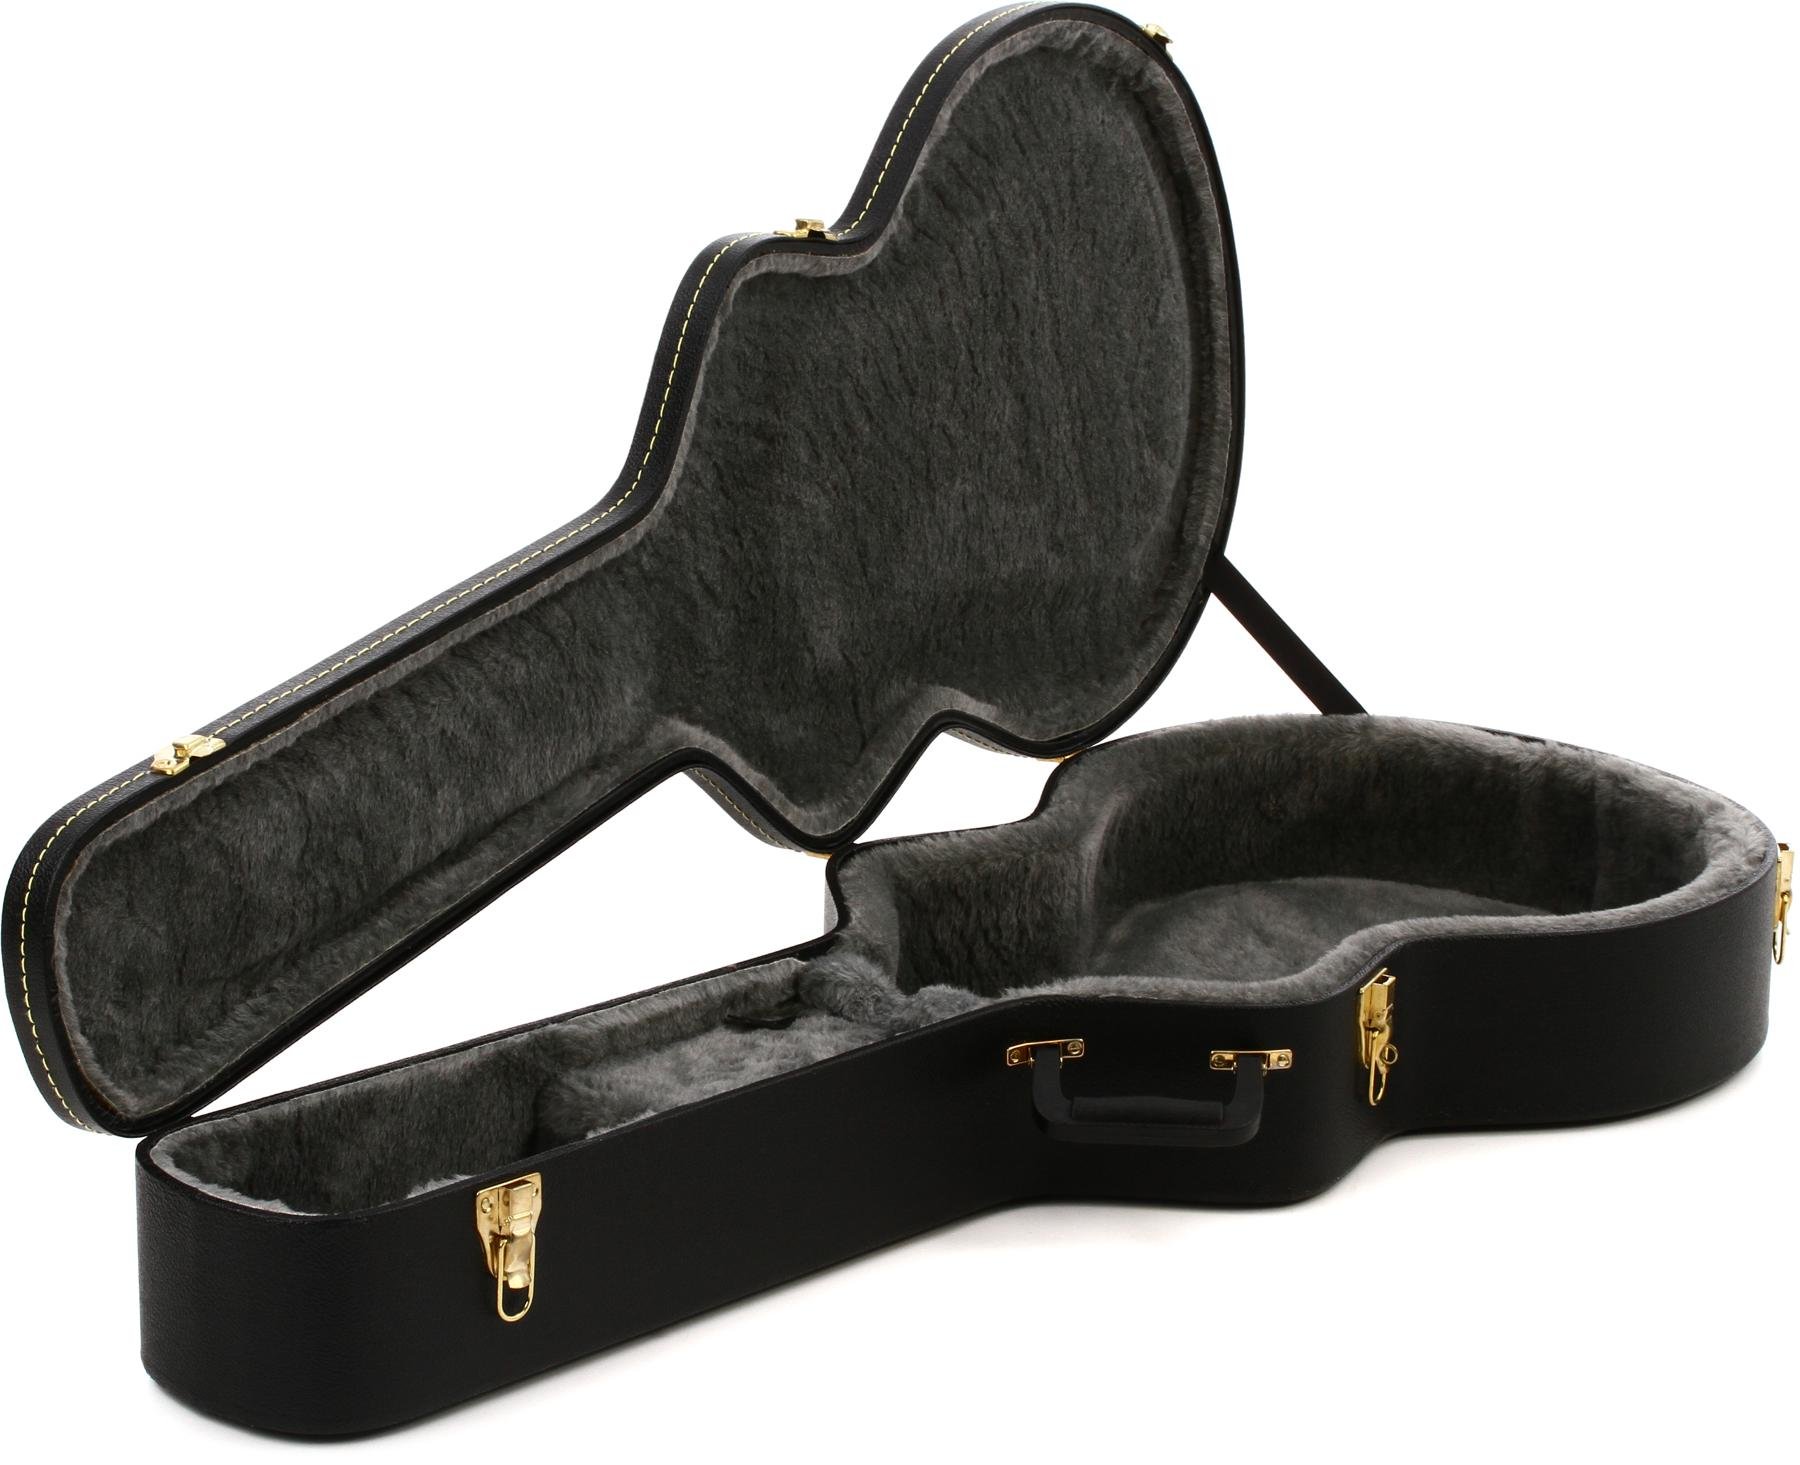 Gretsch Hard Shell Case for G2655T Style Guitars